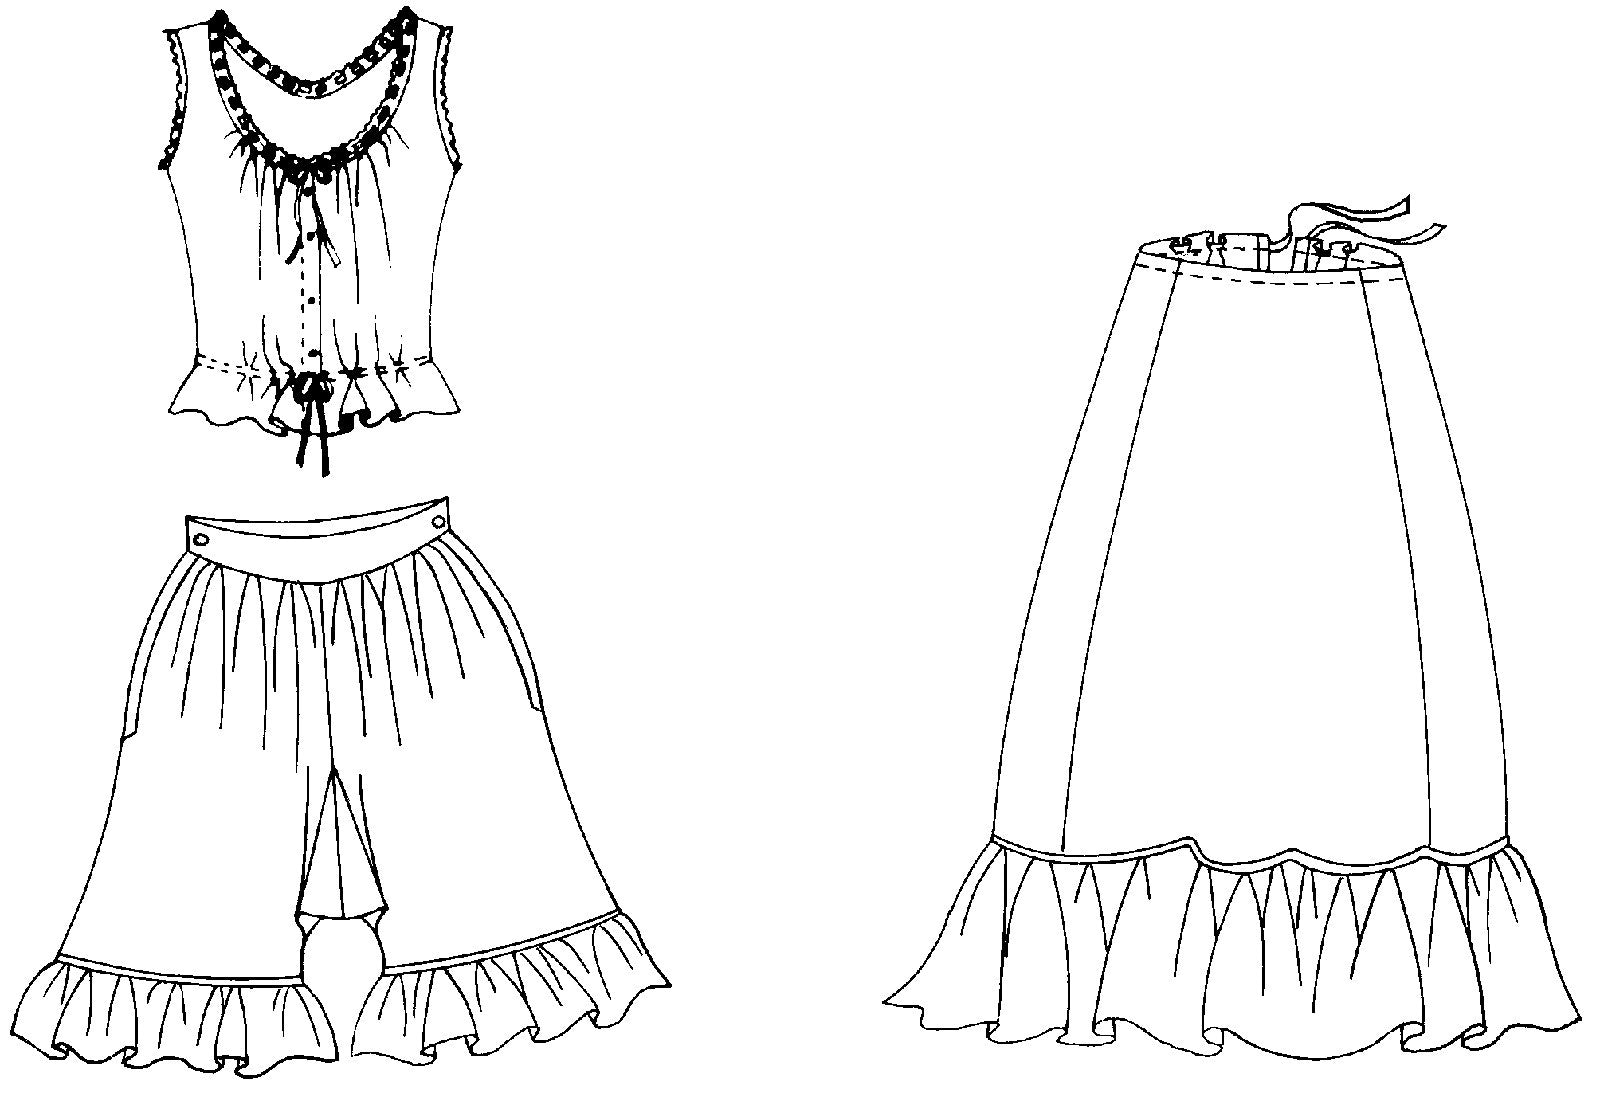 Flat line drawing of camisole, petticoat, and drawers.